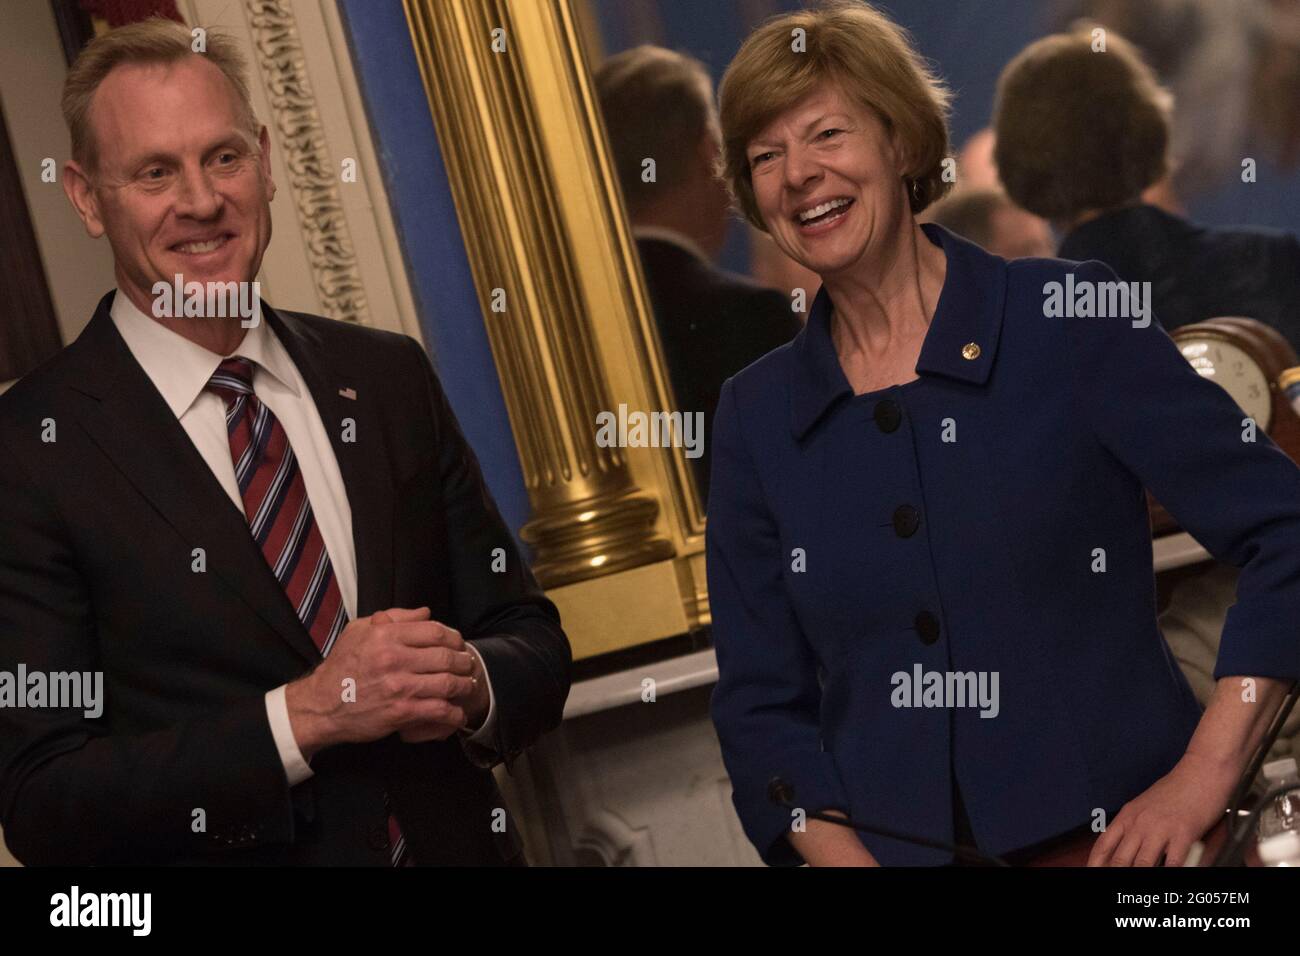 Reportage:   U.S. Acting Secretary of Defense Patrick Shanahan, about to testify before the Senate Appropriations Defense Subcommittee on the fiscal 2020 Department of Defense budget, at the U.S. Capitol building, Washington, D.C., May 1, 2019. Stock Photo